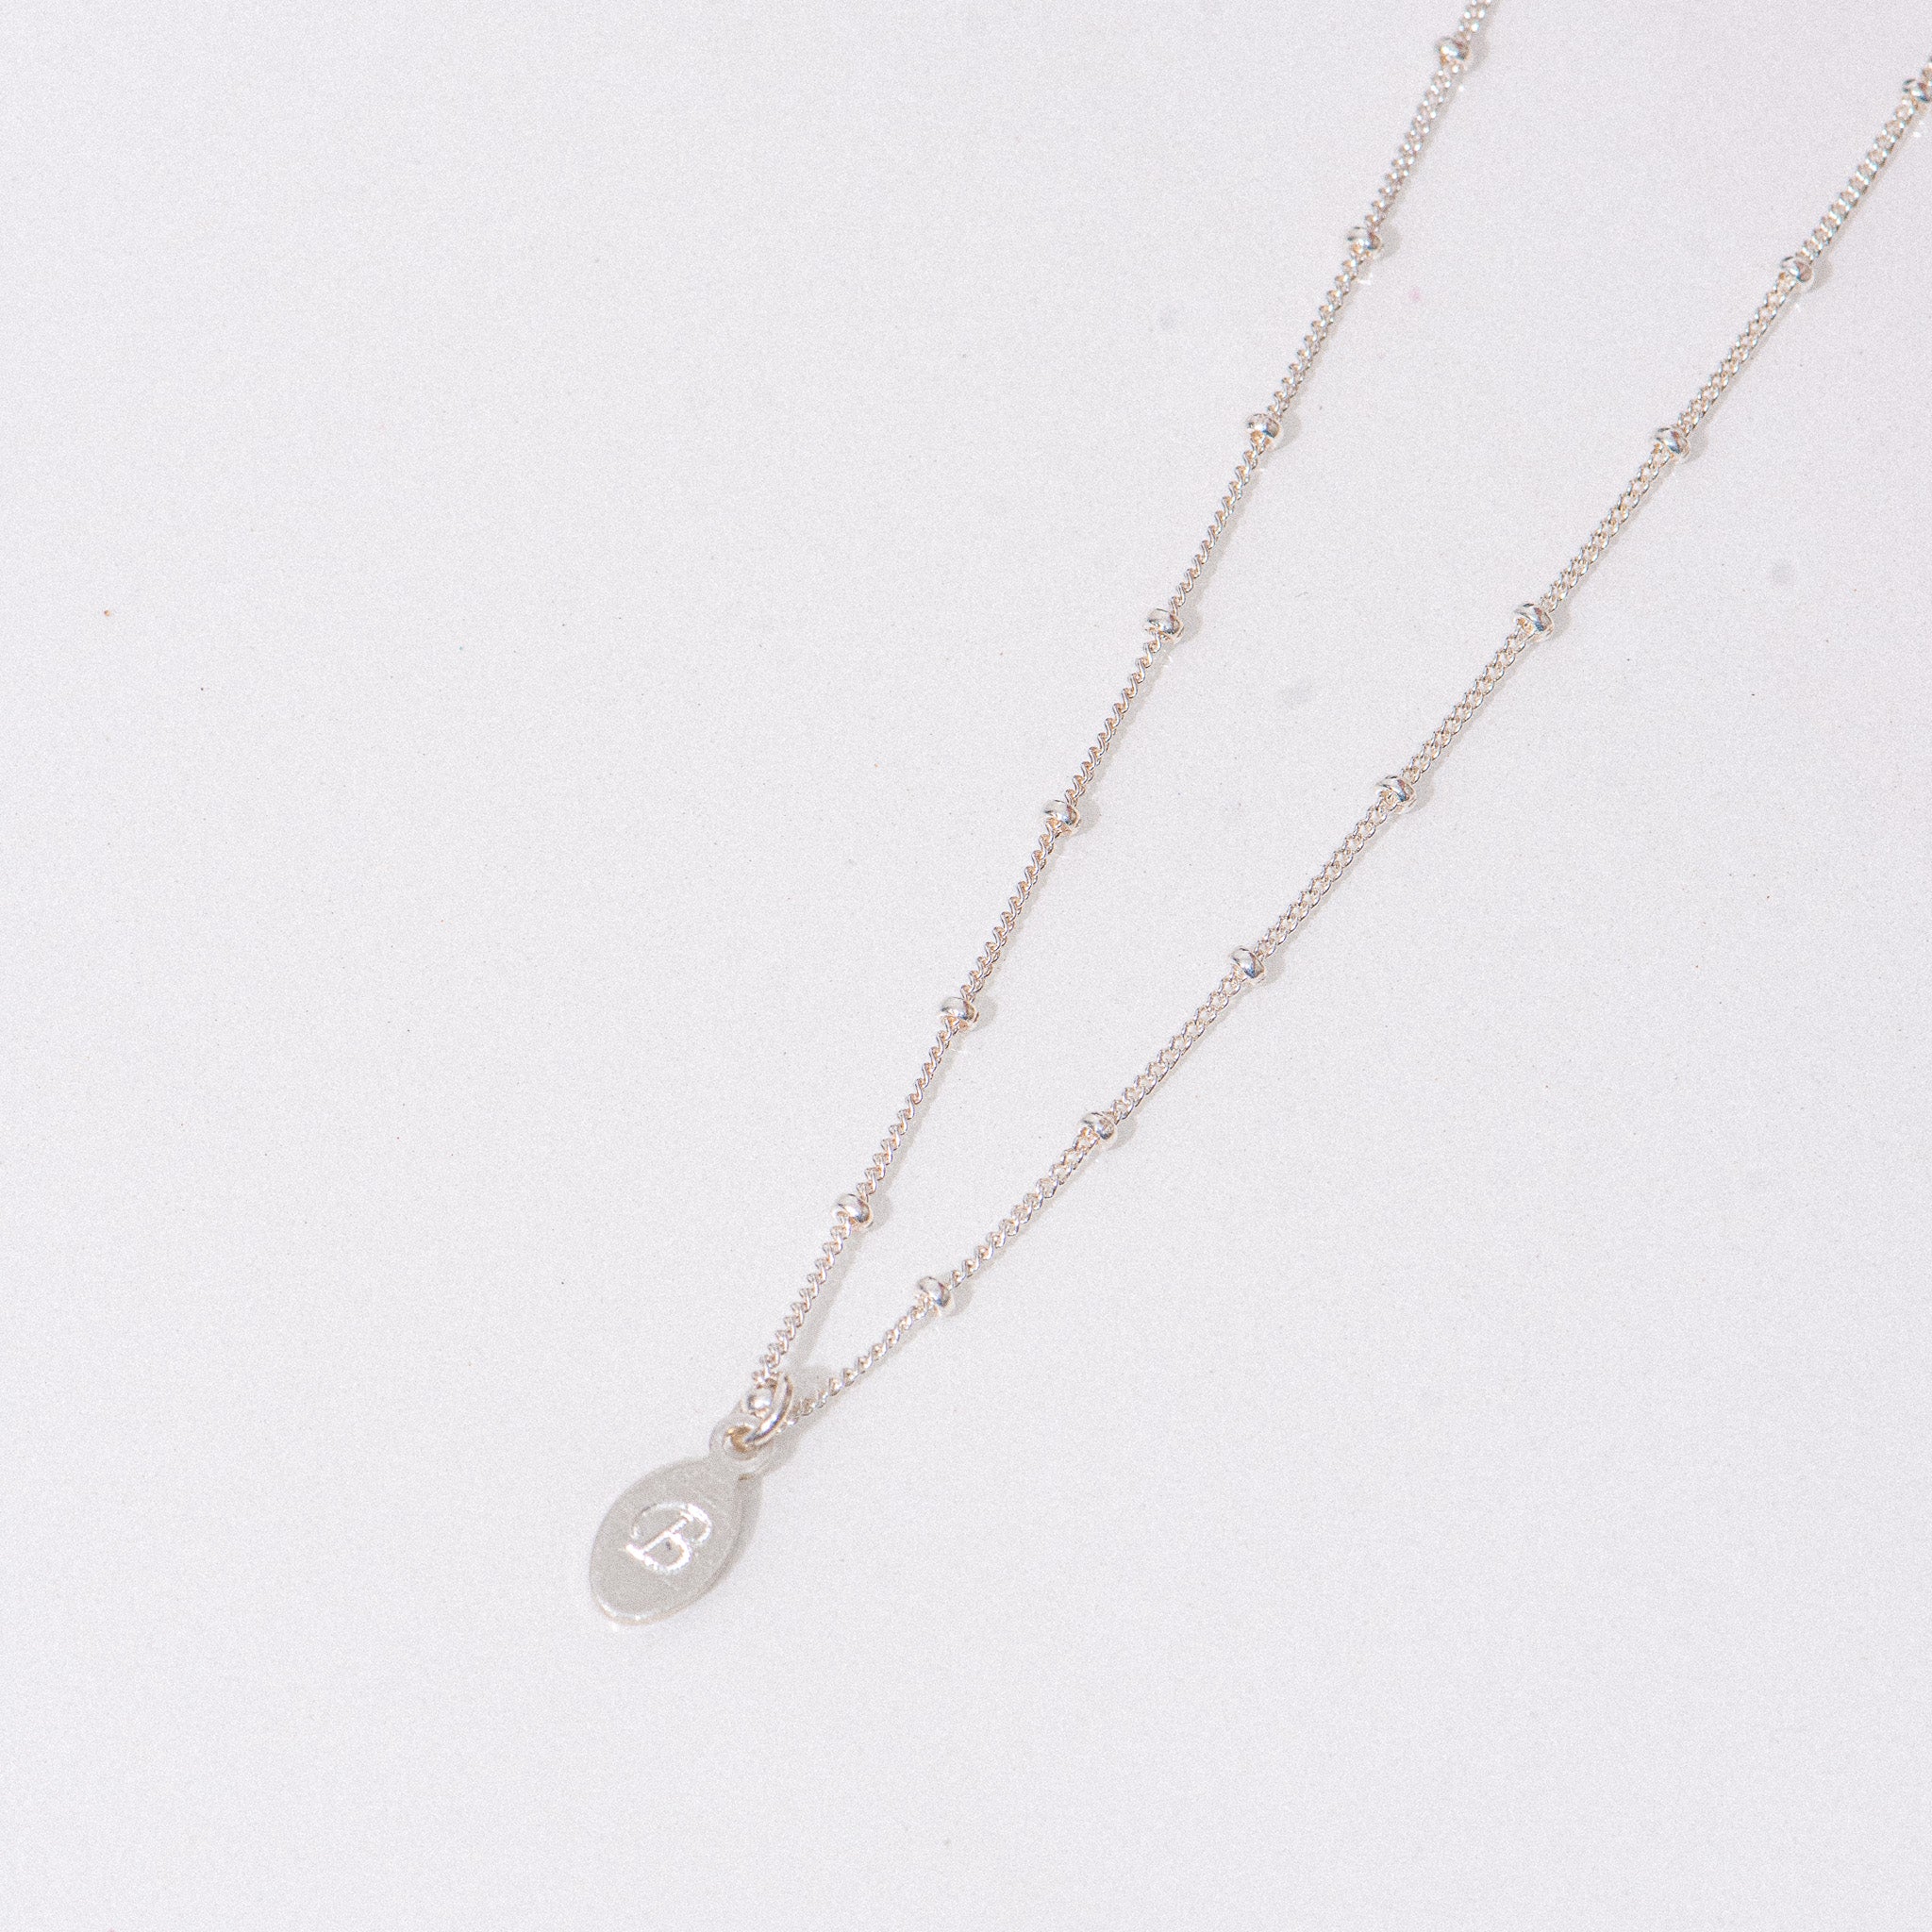 Silver Beaded Engraved 'B' Necklace